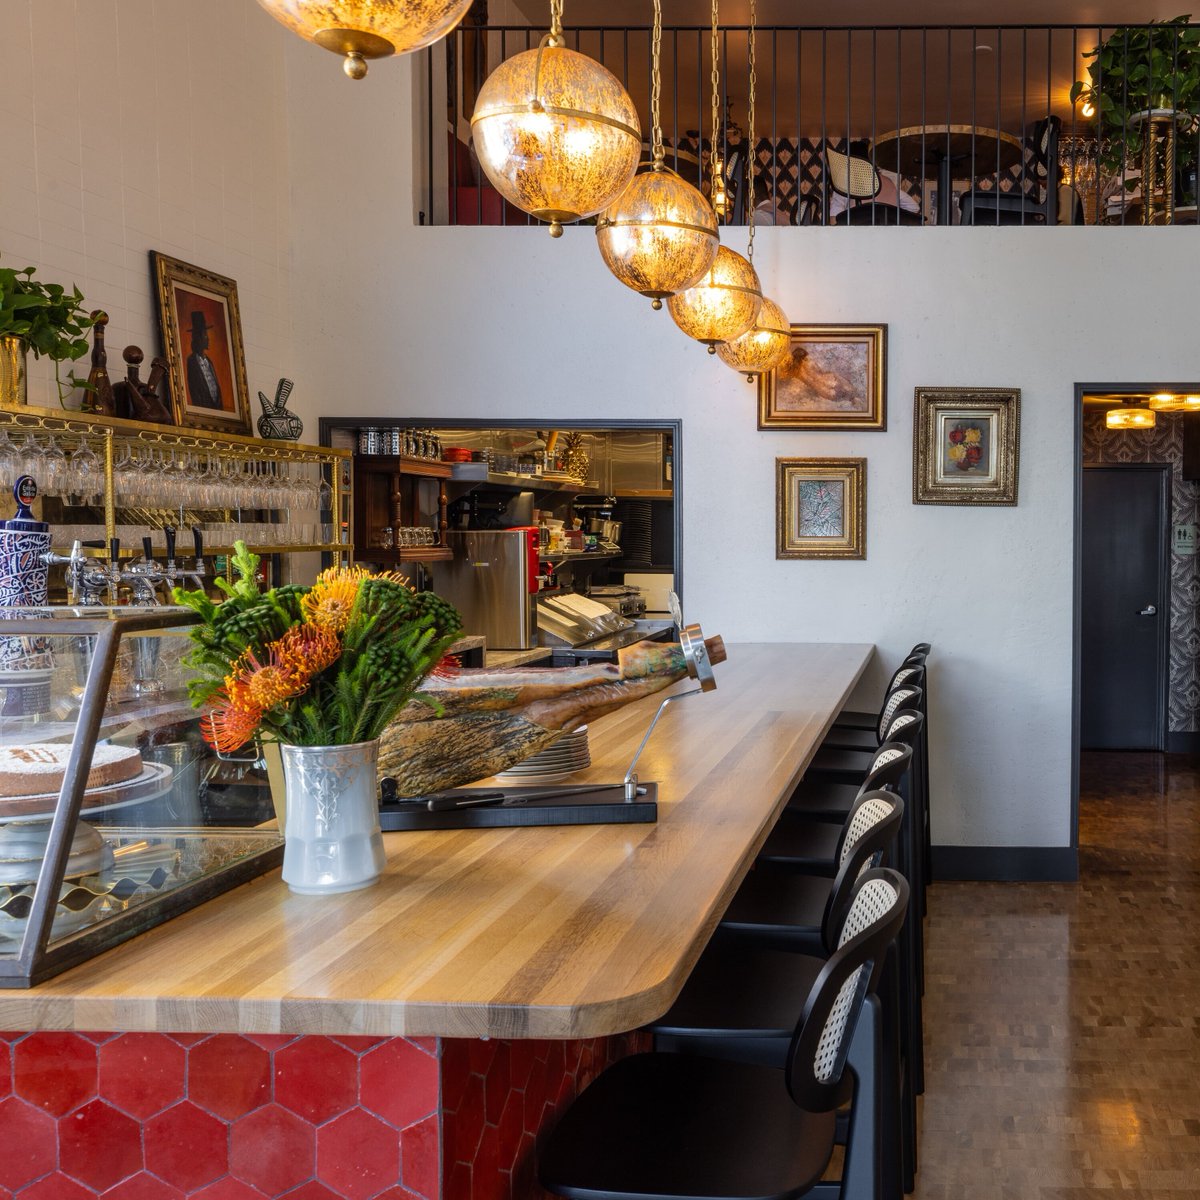 Relaxed but refined, Xuntos is a standout Santa Monica eatery celebrating Spanish cuisine and local produce, inspired by Chef Sandra Cordero’s memories from her family farm in Spain.☀️.🍅🌿 bit.ly/4aeqmWT Photos by Stan Lee #eatlocal #tapas #foodie #SantaMonica